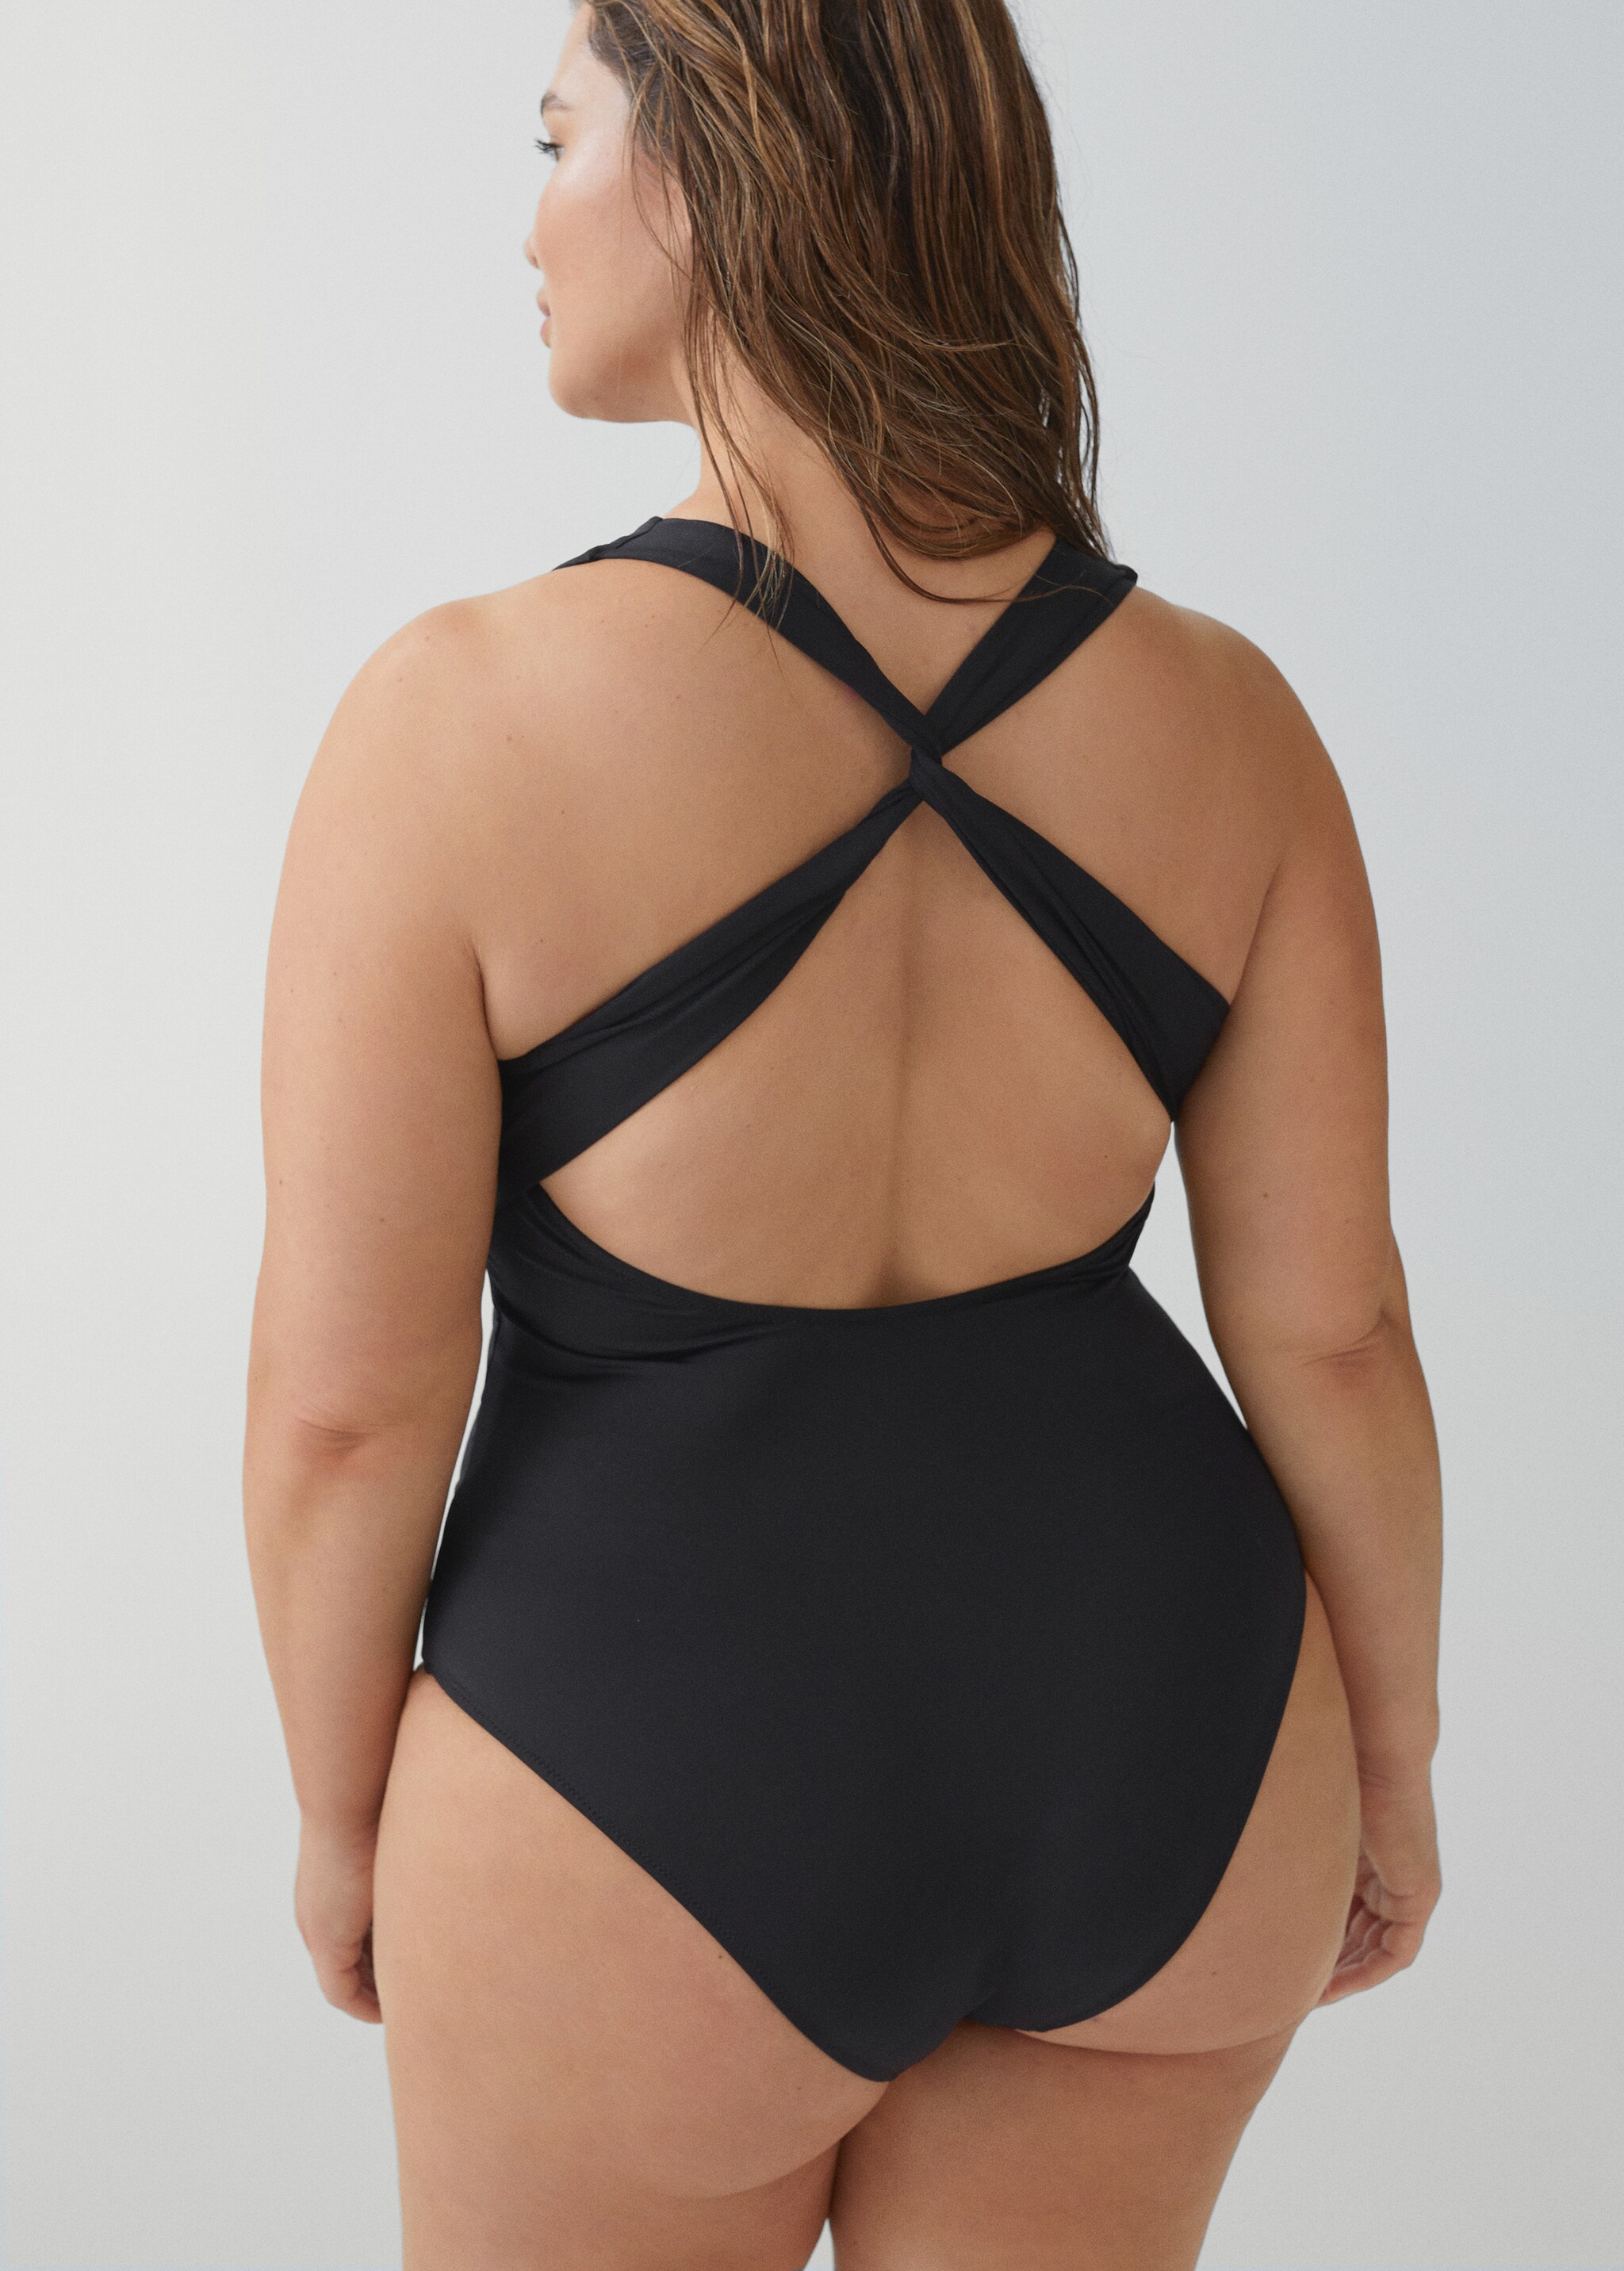 V-neck swimsuit - Details of the article 4